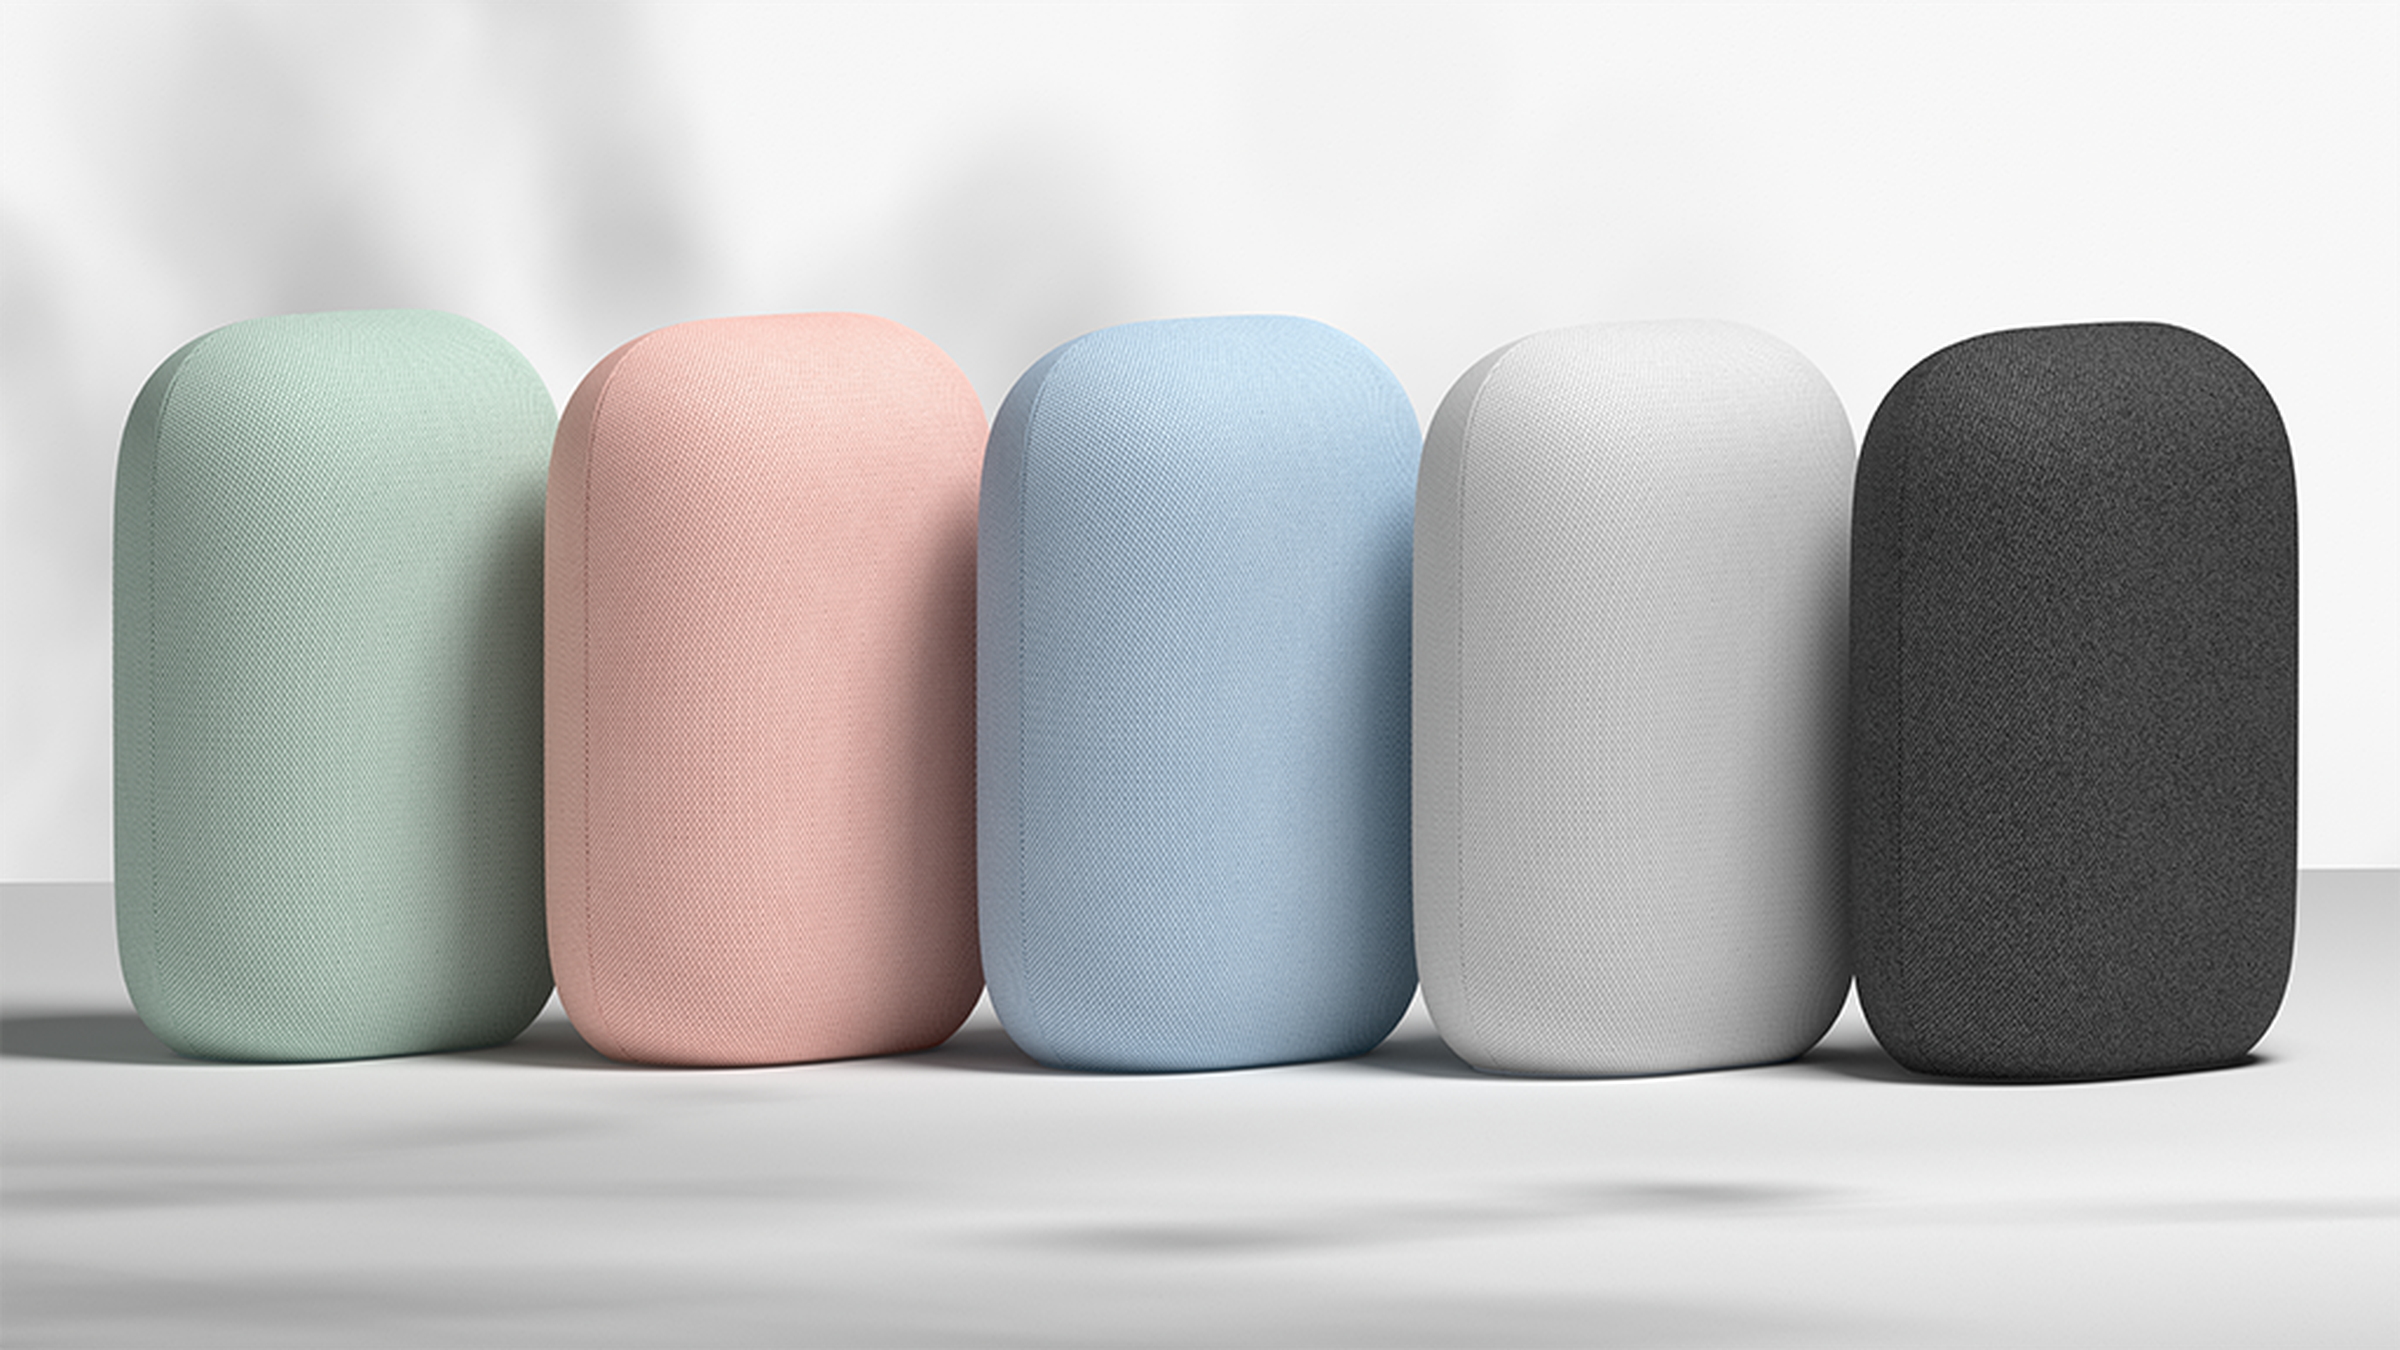 The Nest Audio comes in five different colors.